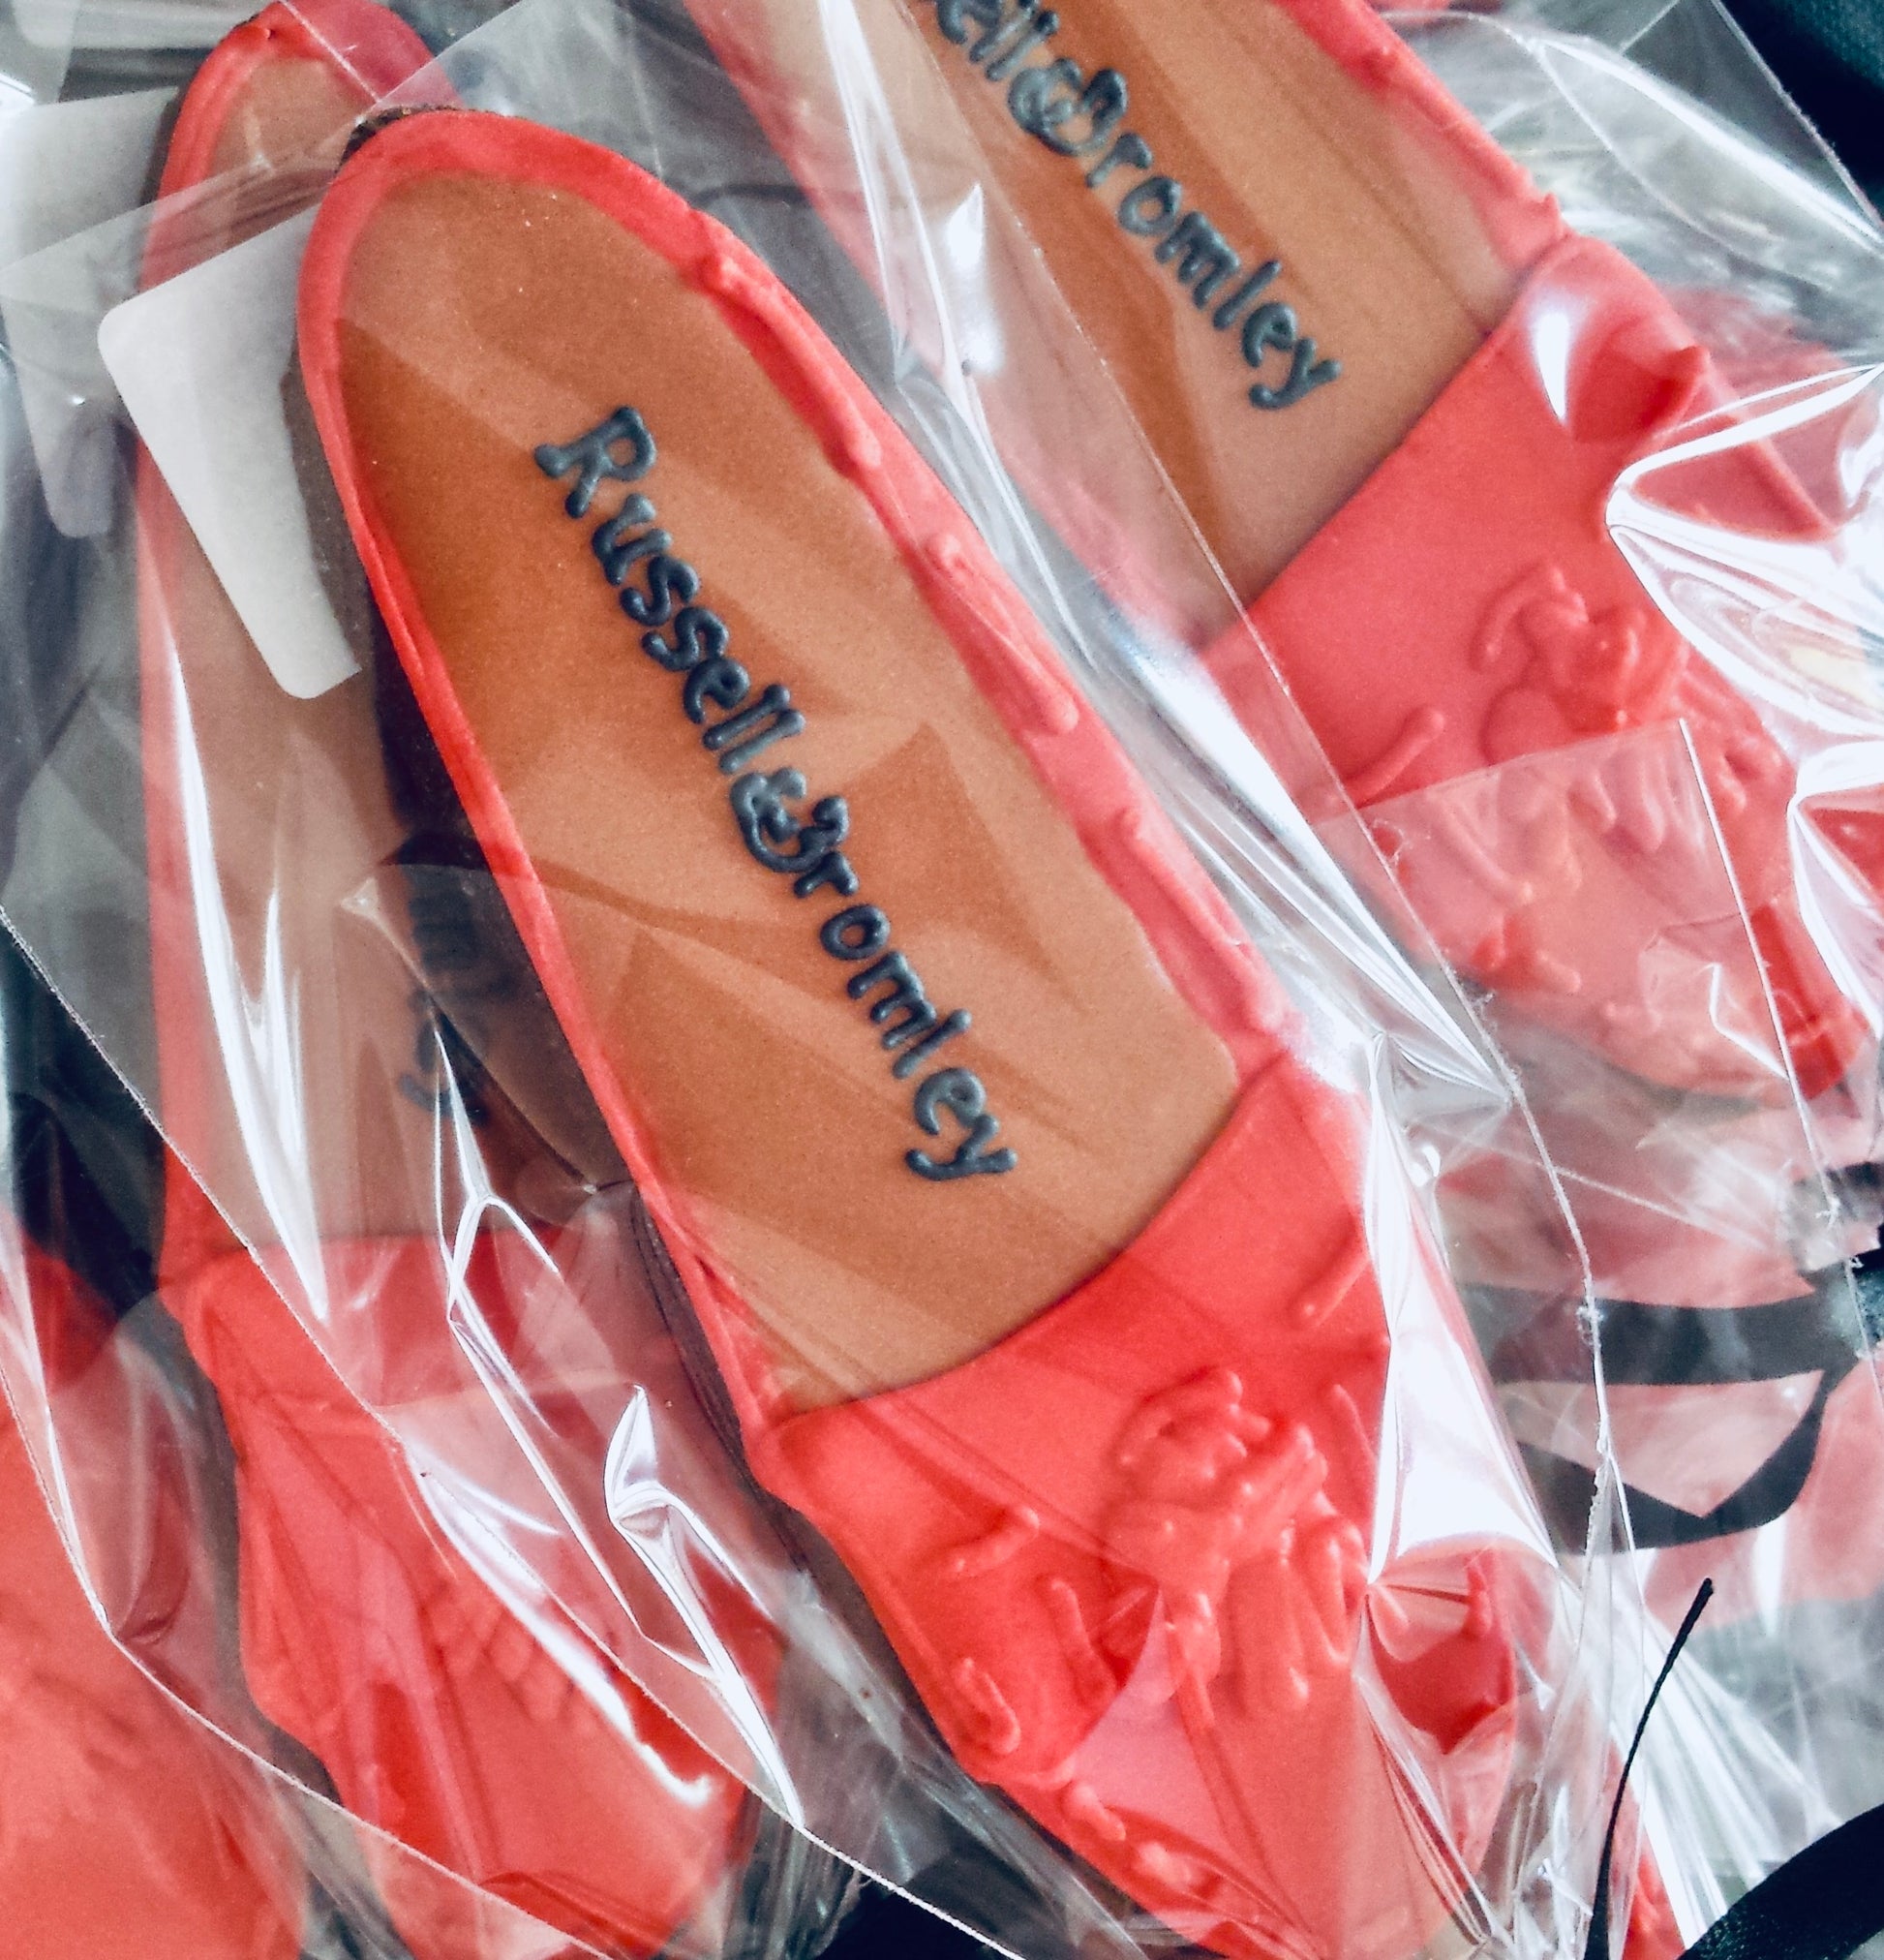 Red shoes for Russell and Bromley London. individually wrapped shoe biscuits for brand launch.